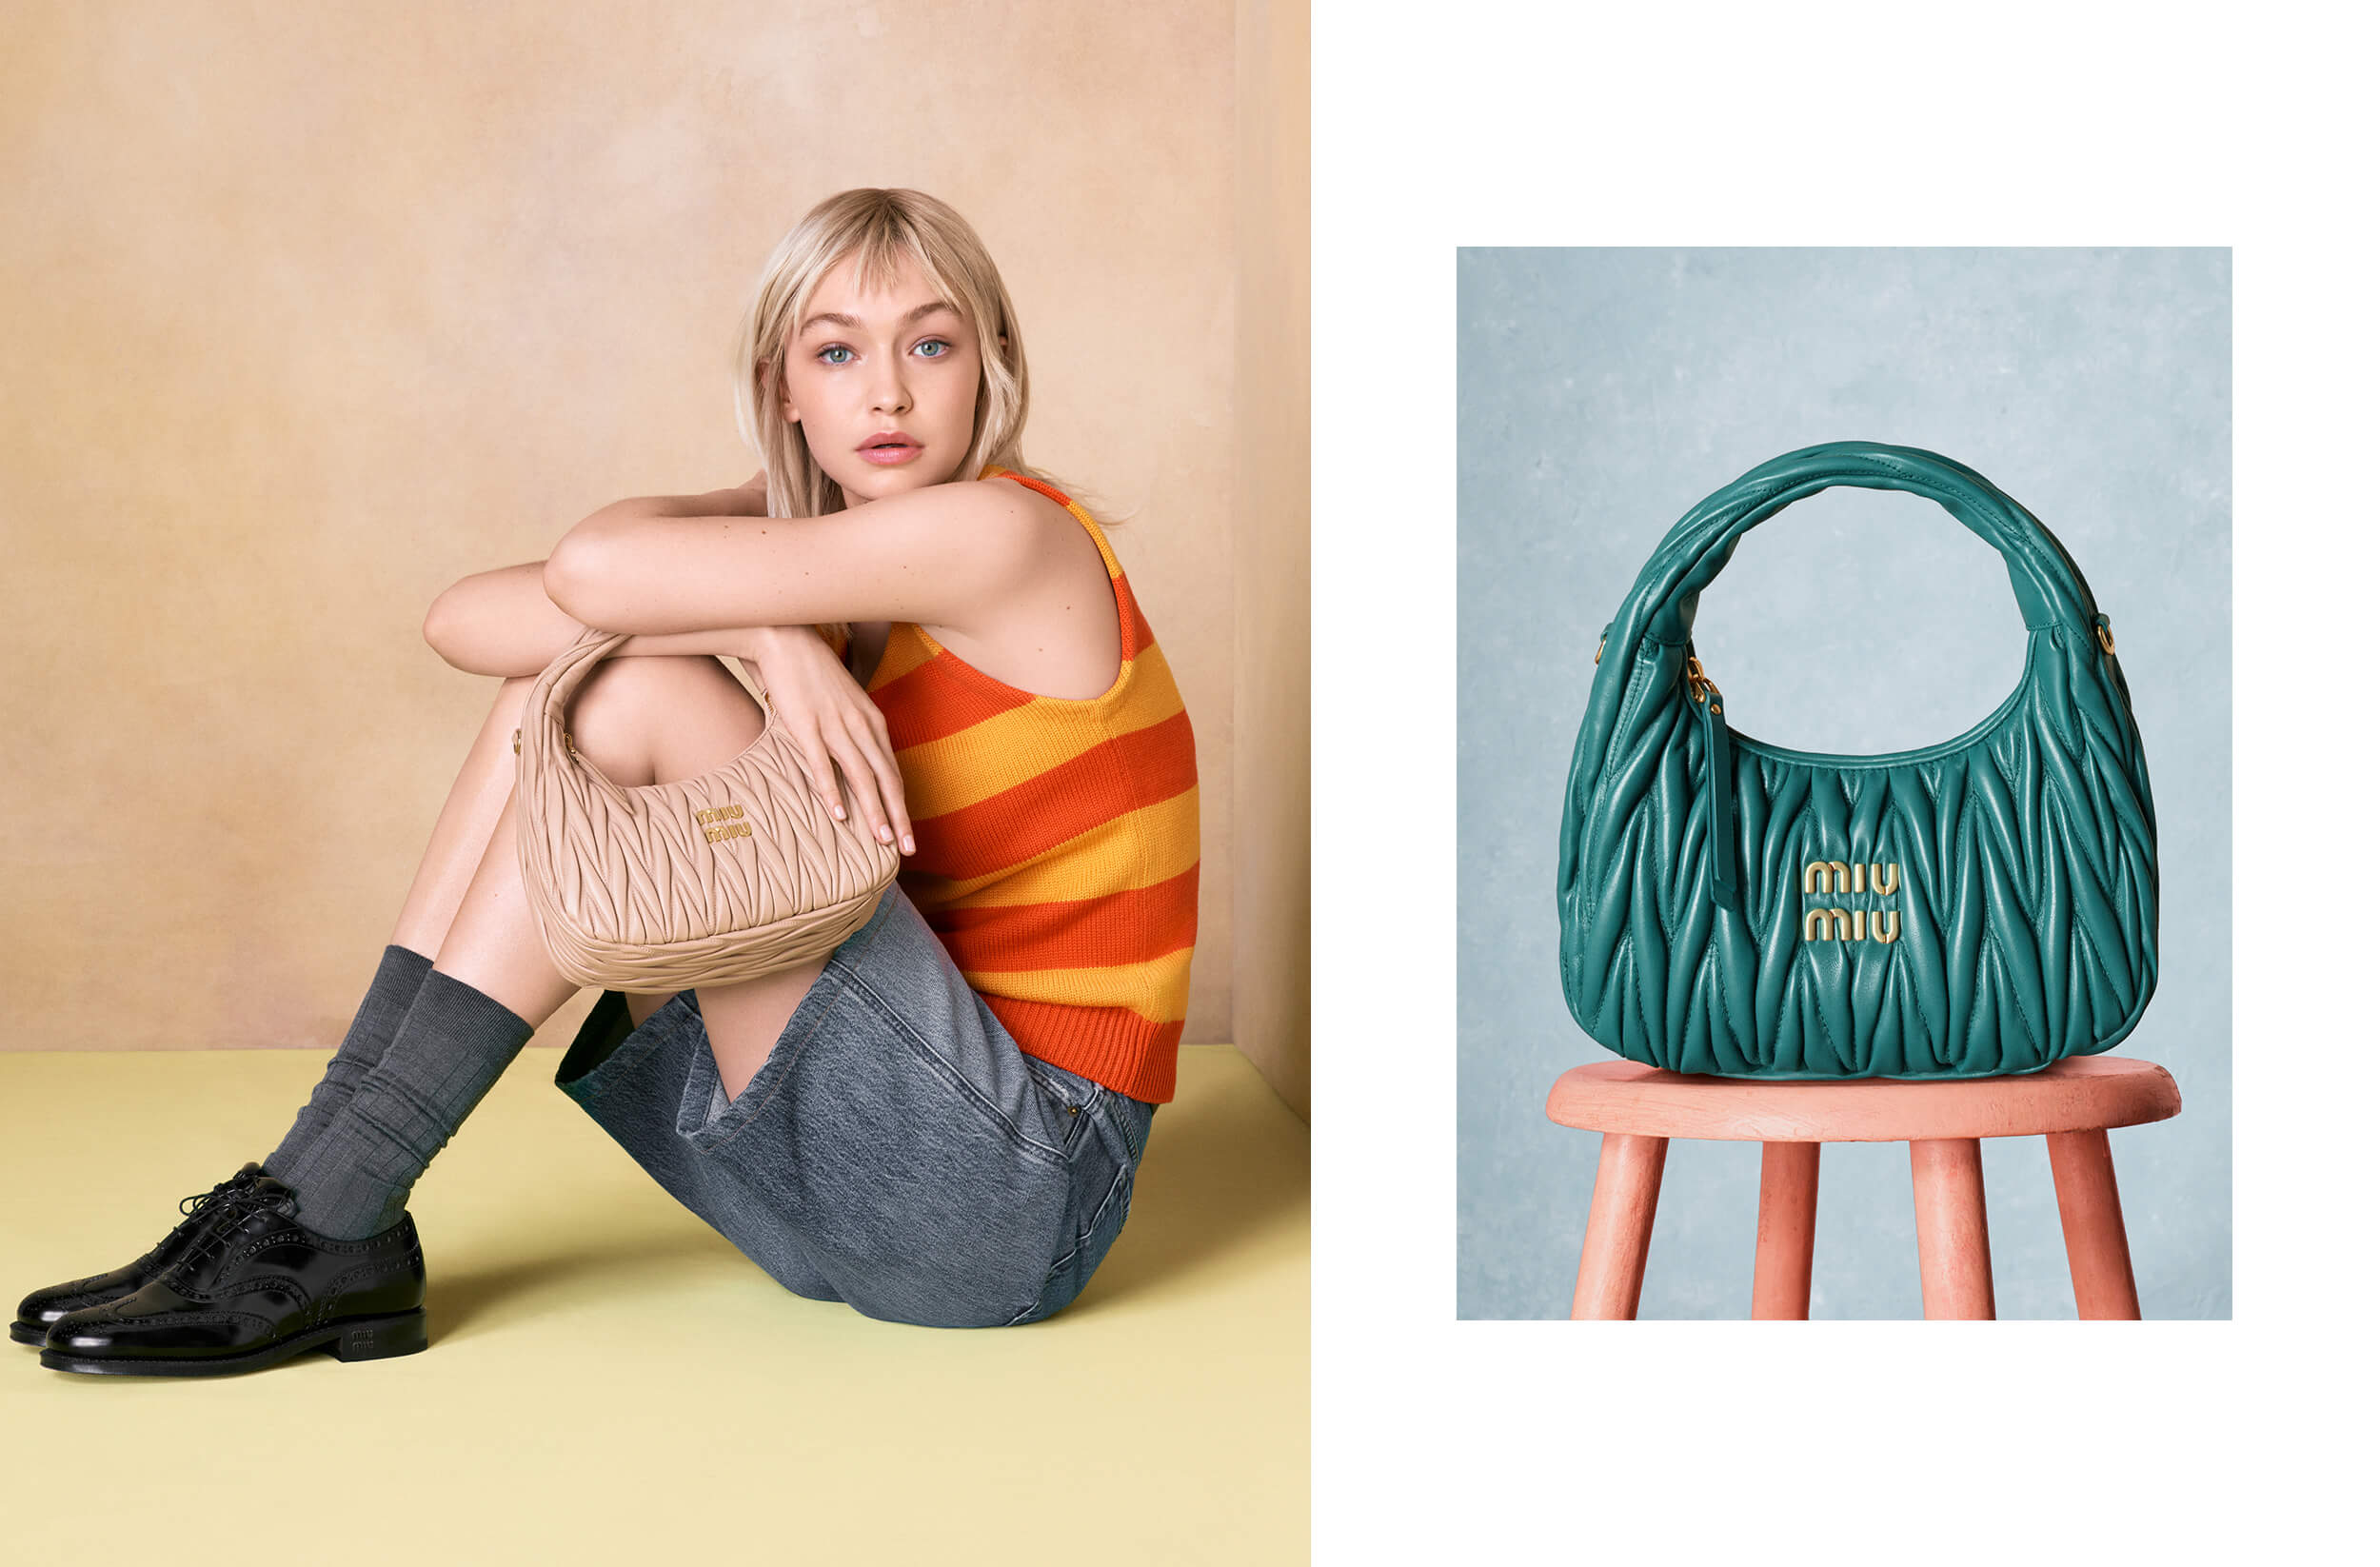 Miu Miu and the new Arcadie: a Campaign Inspired by Margaret Keane